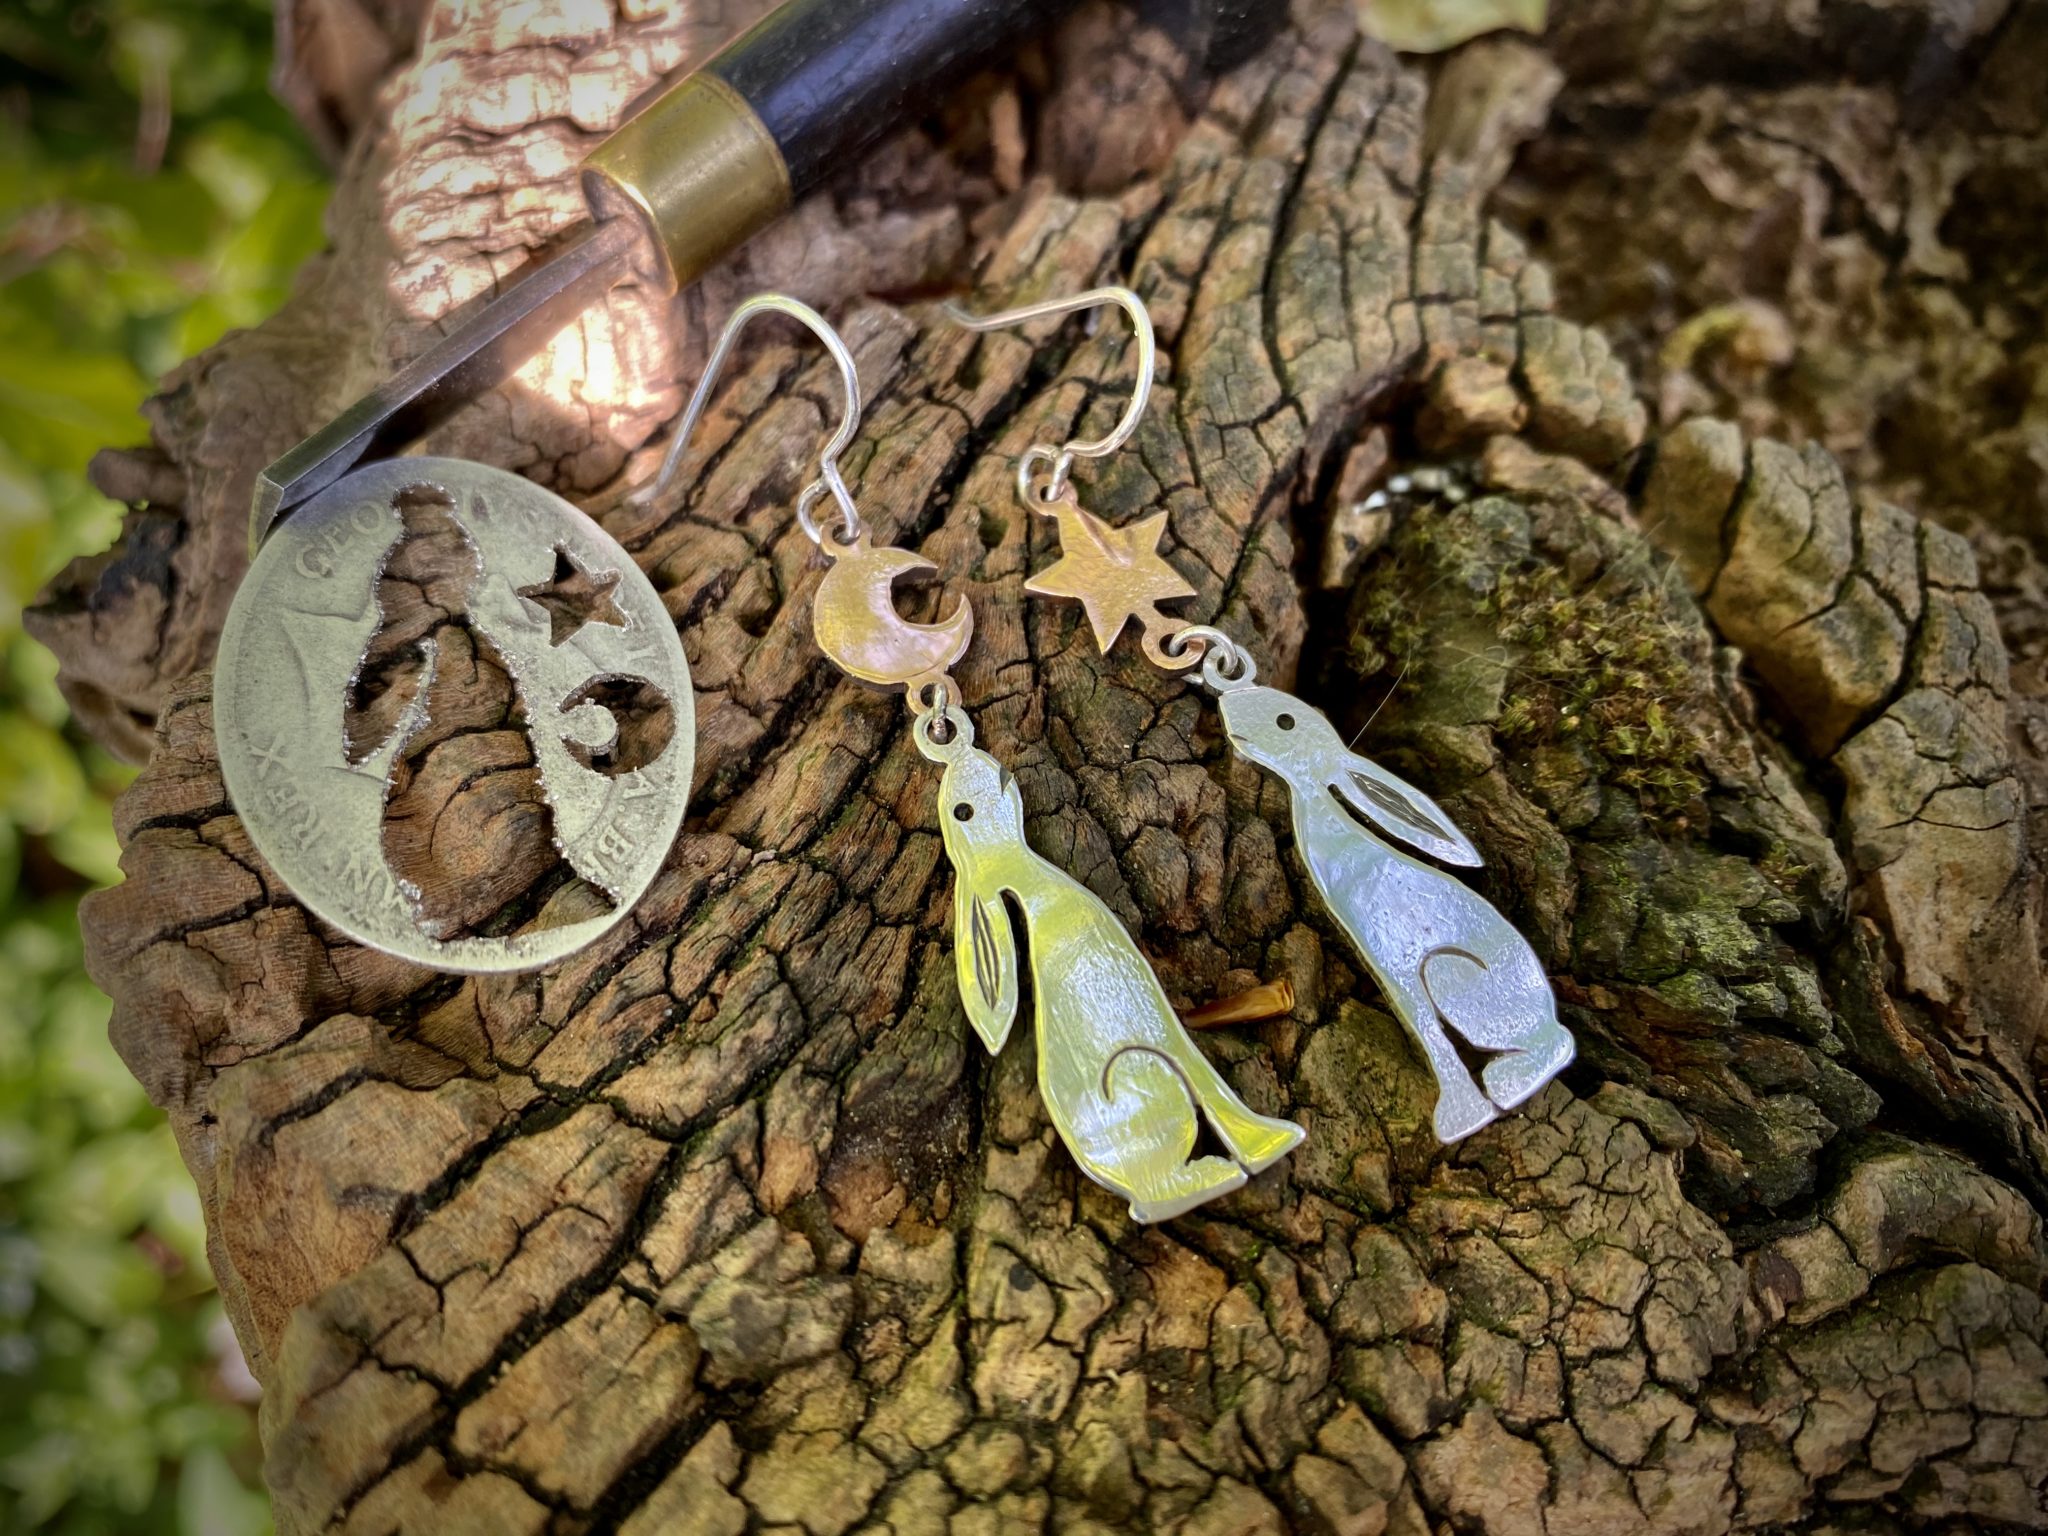 Moon Gazing Hare earrings - Recycled sterling silver shilling coins